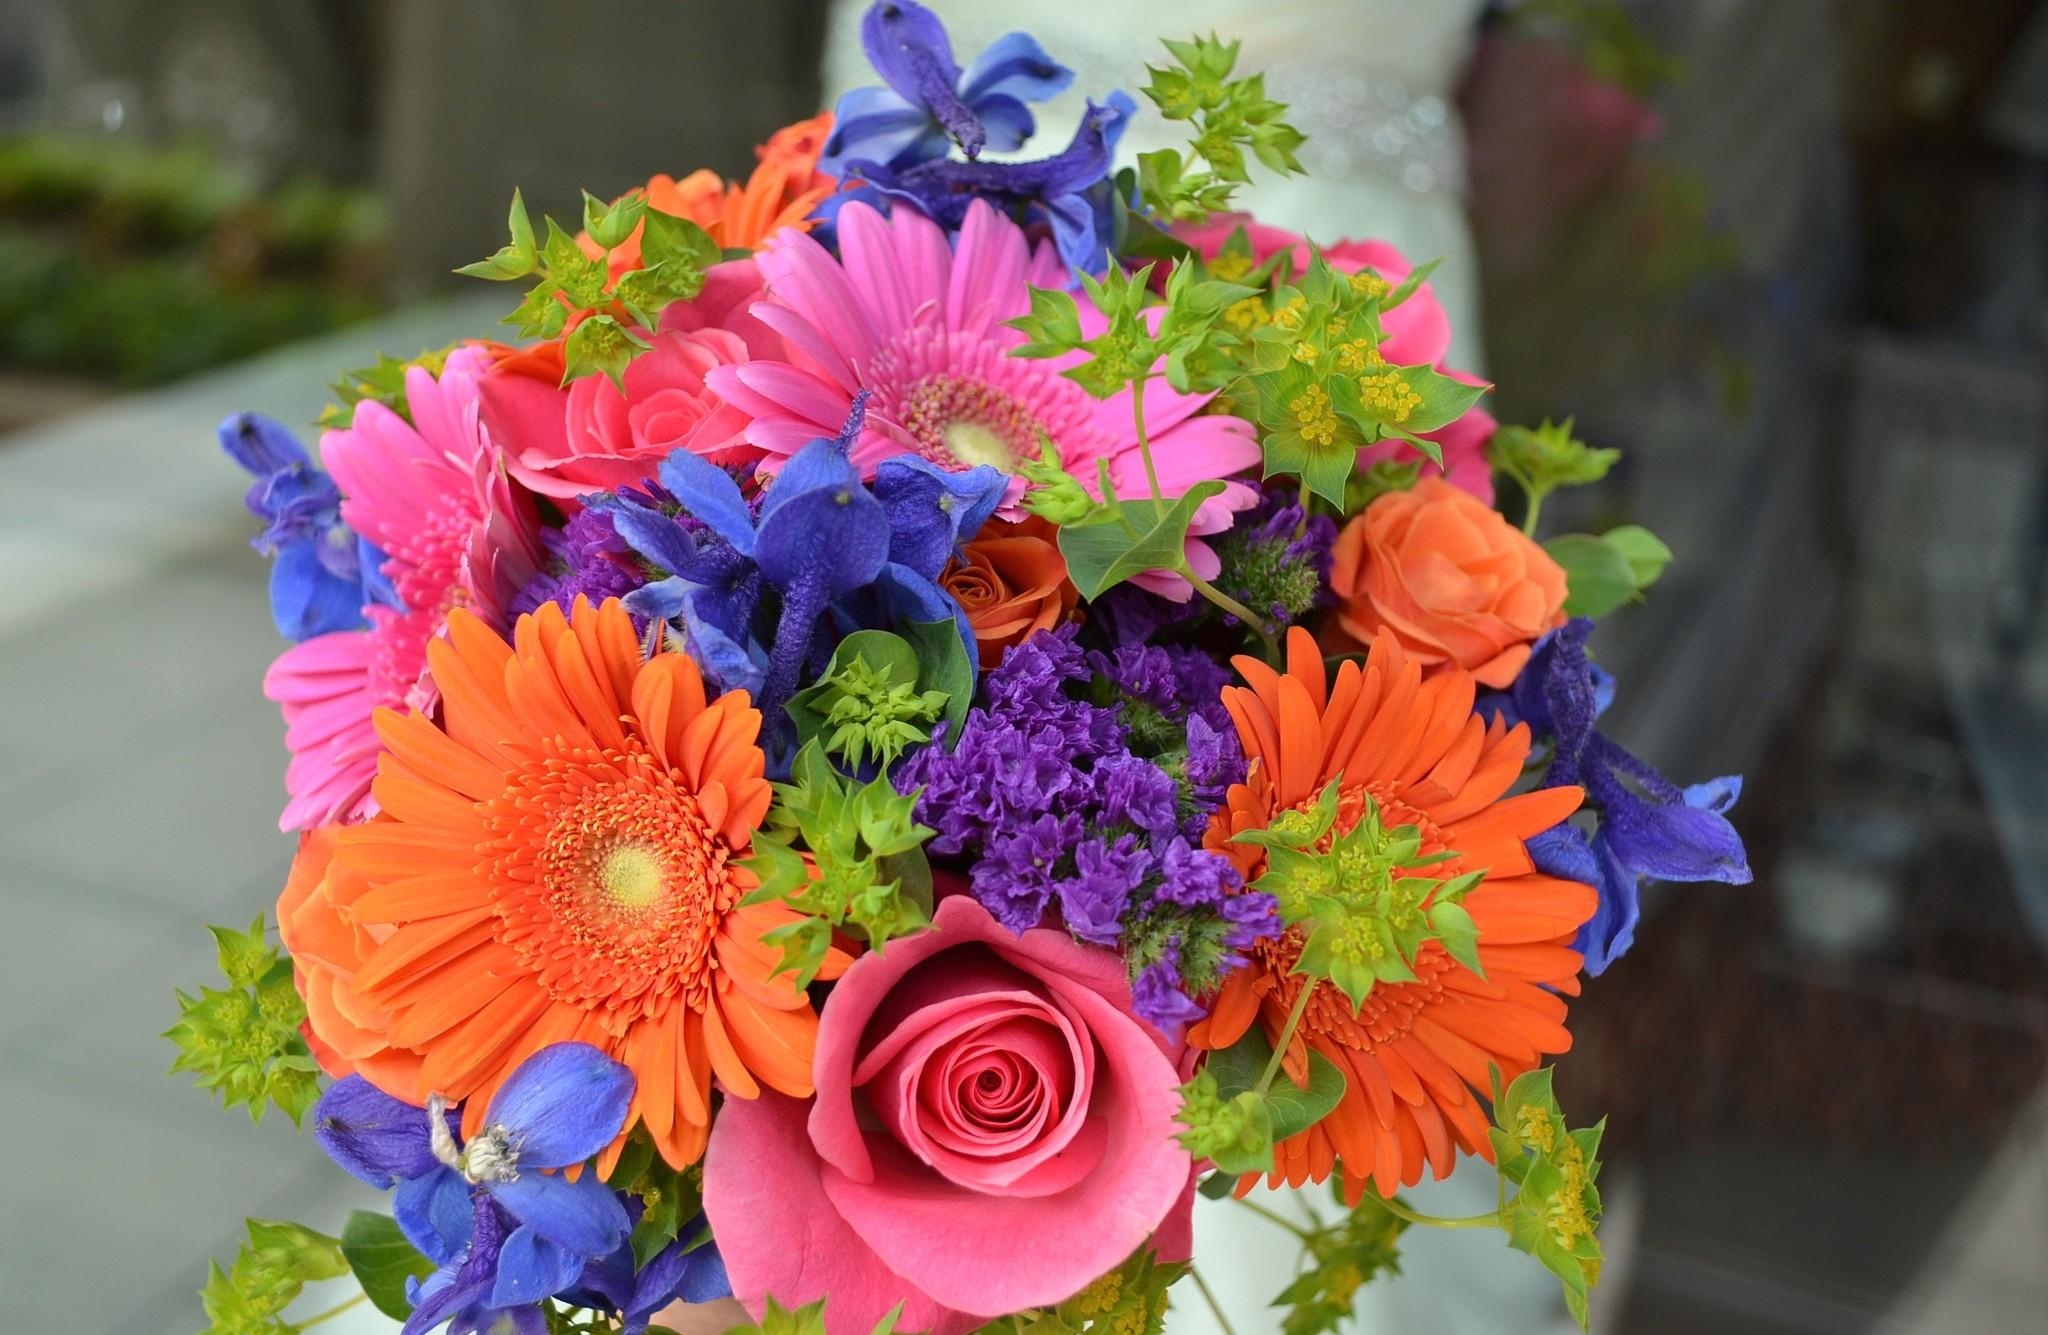 Popular Bouquet images for mobile phone